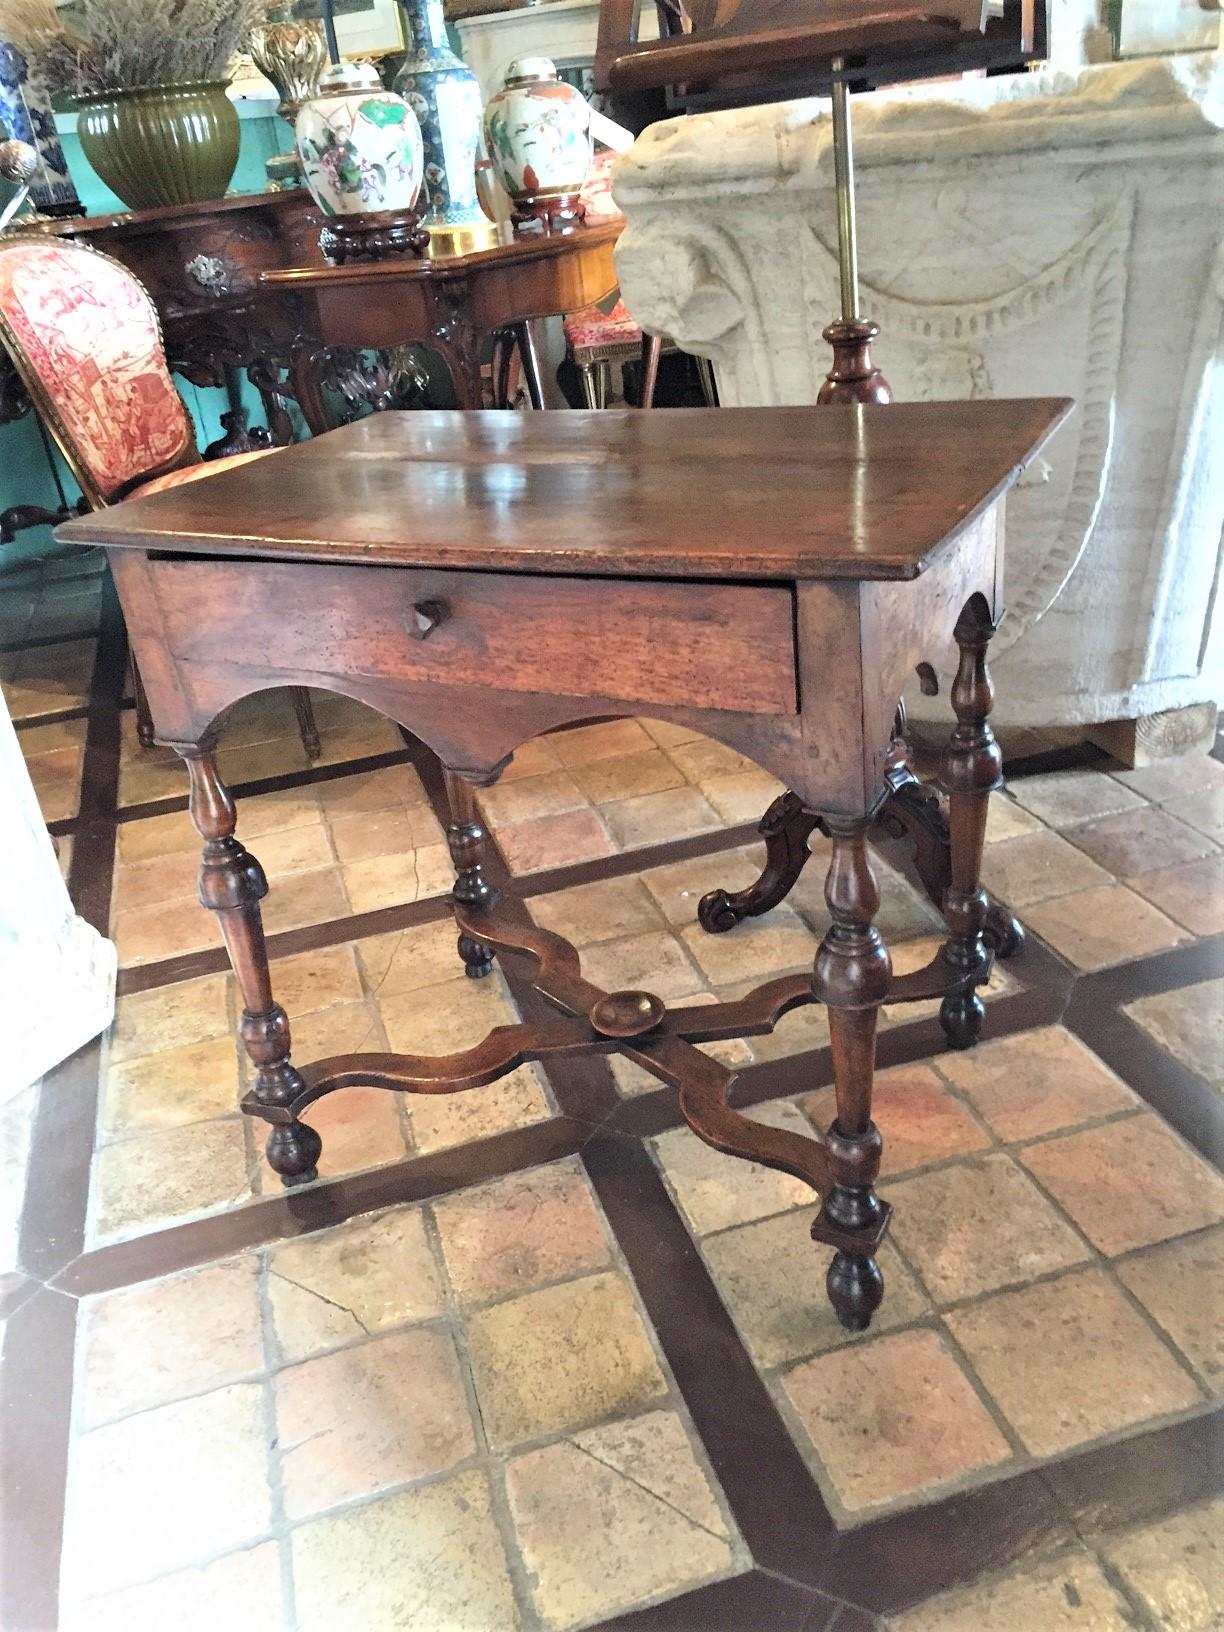 A 17th century antique beautifully carved Charles II walnut table baluster legs joined by a stretcher, standing on original turned bun feet. It's not an oak somber table, the walnut gives it much charm. It could be perfect for a side table, between